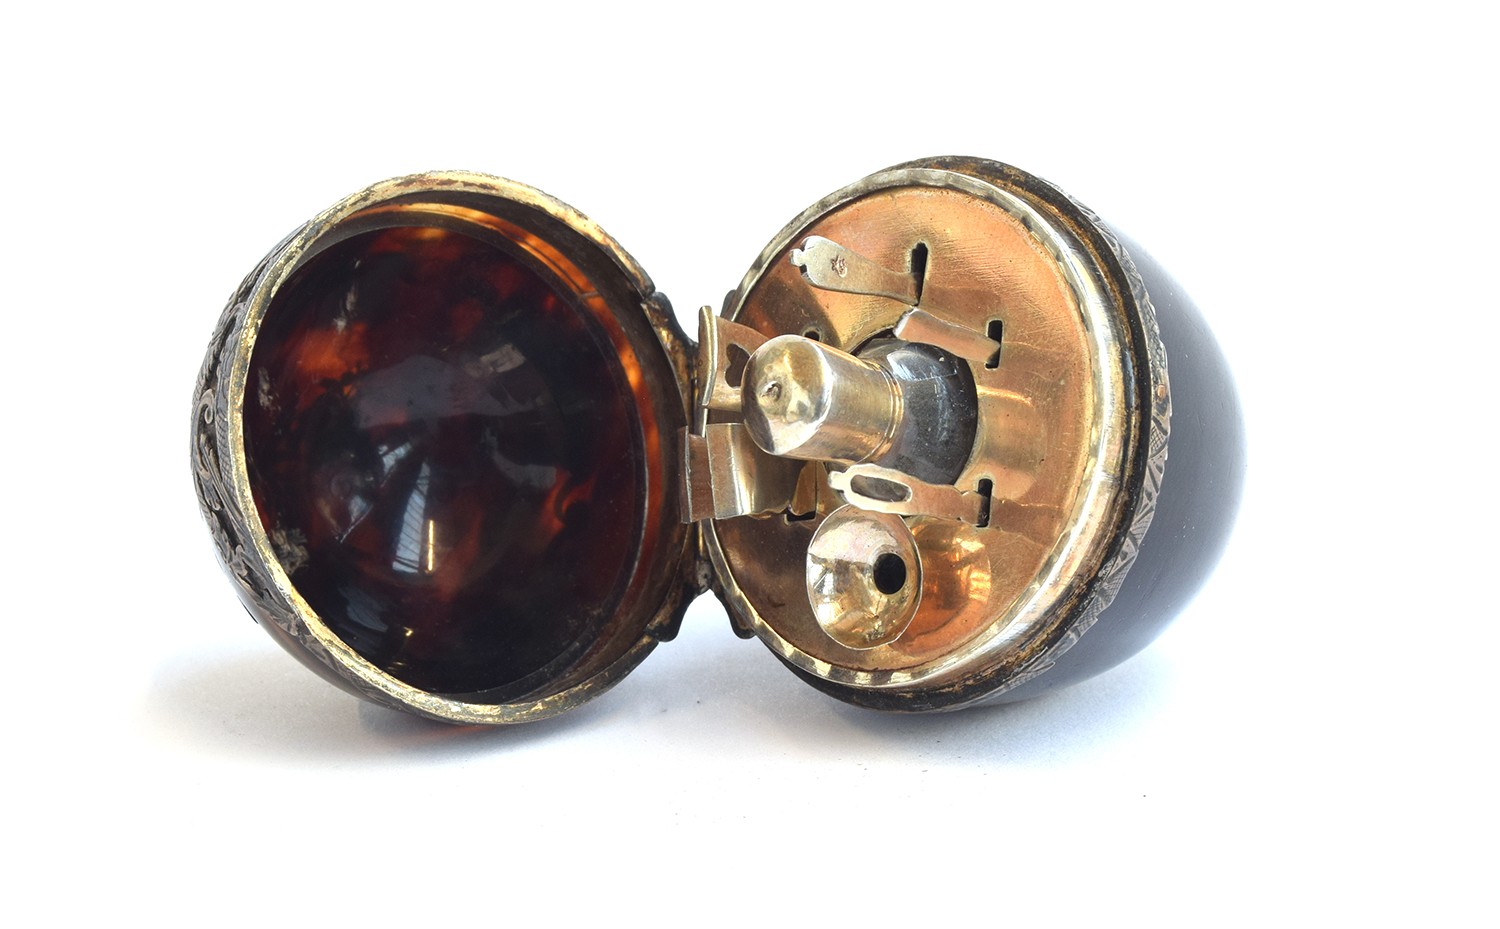 A 19th century tortoiseshell and pique egg shape necessaire, the hinged cover decorated with a spray